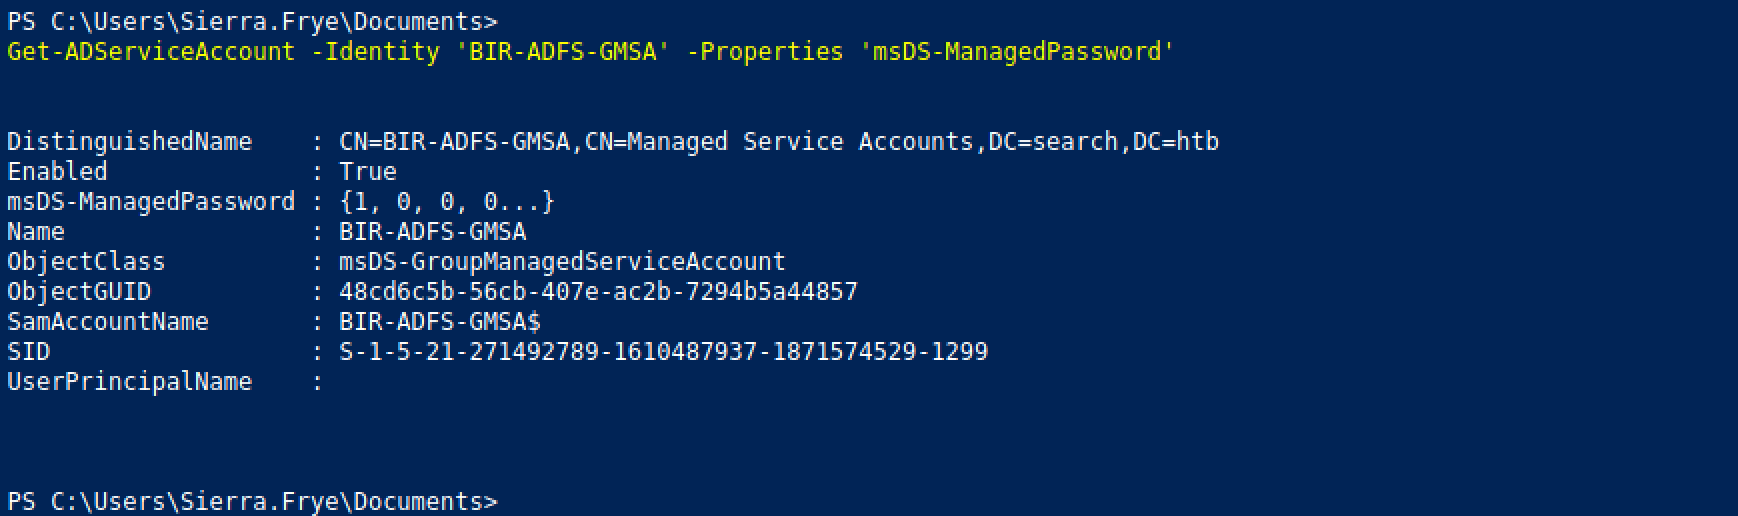 Getting the service account with the Get-ADServiceAccount with the msDS-ManagedPassword attribute.